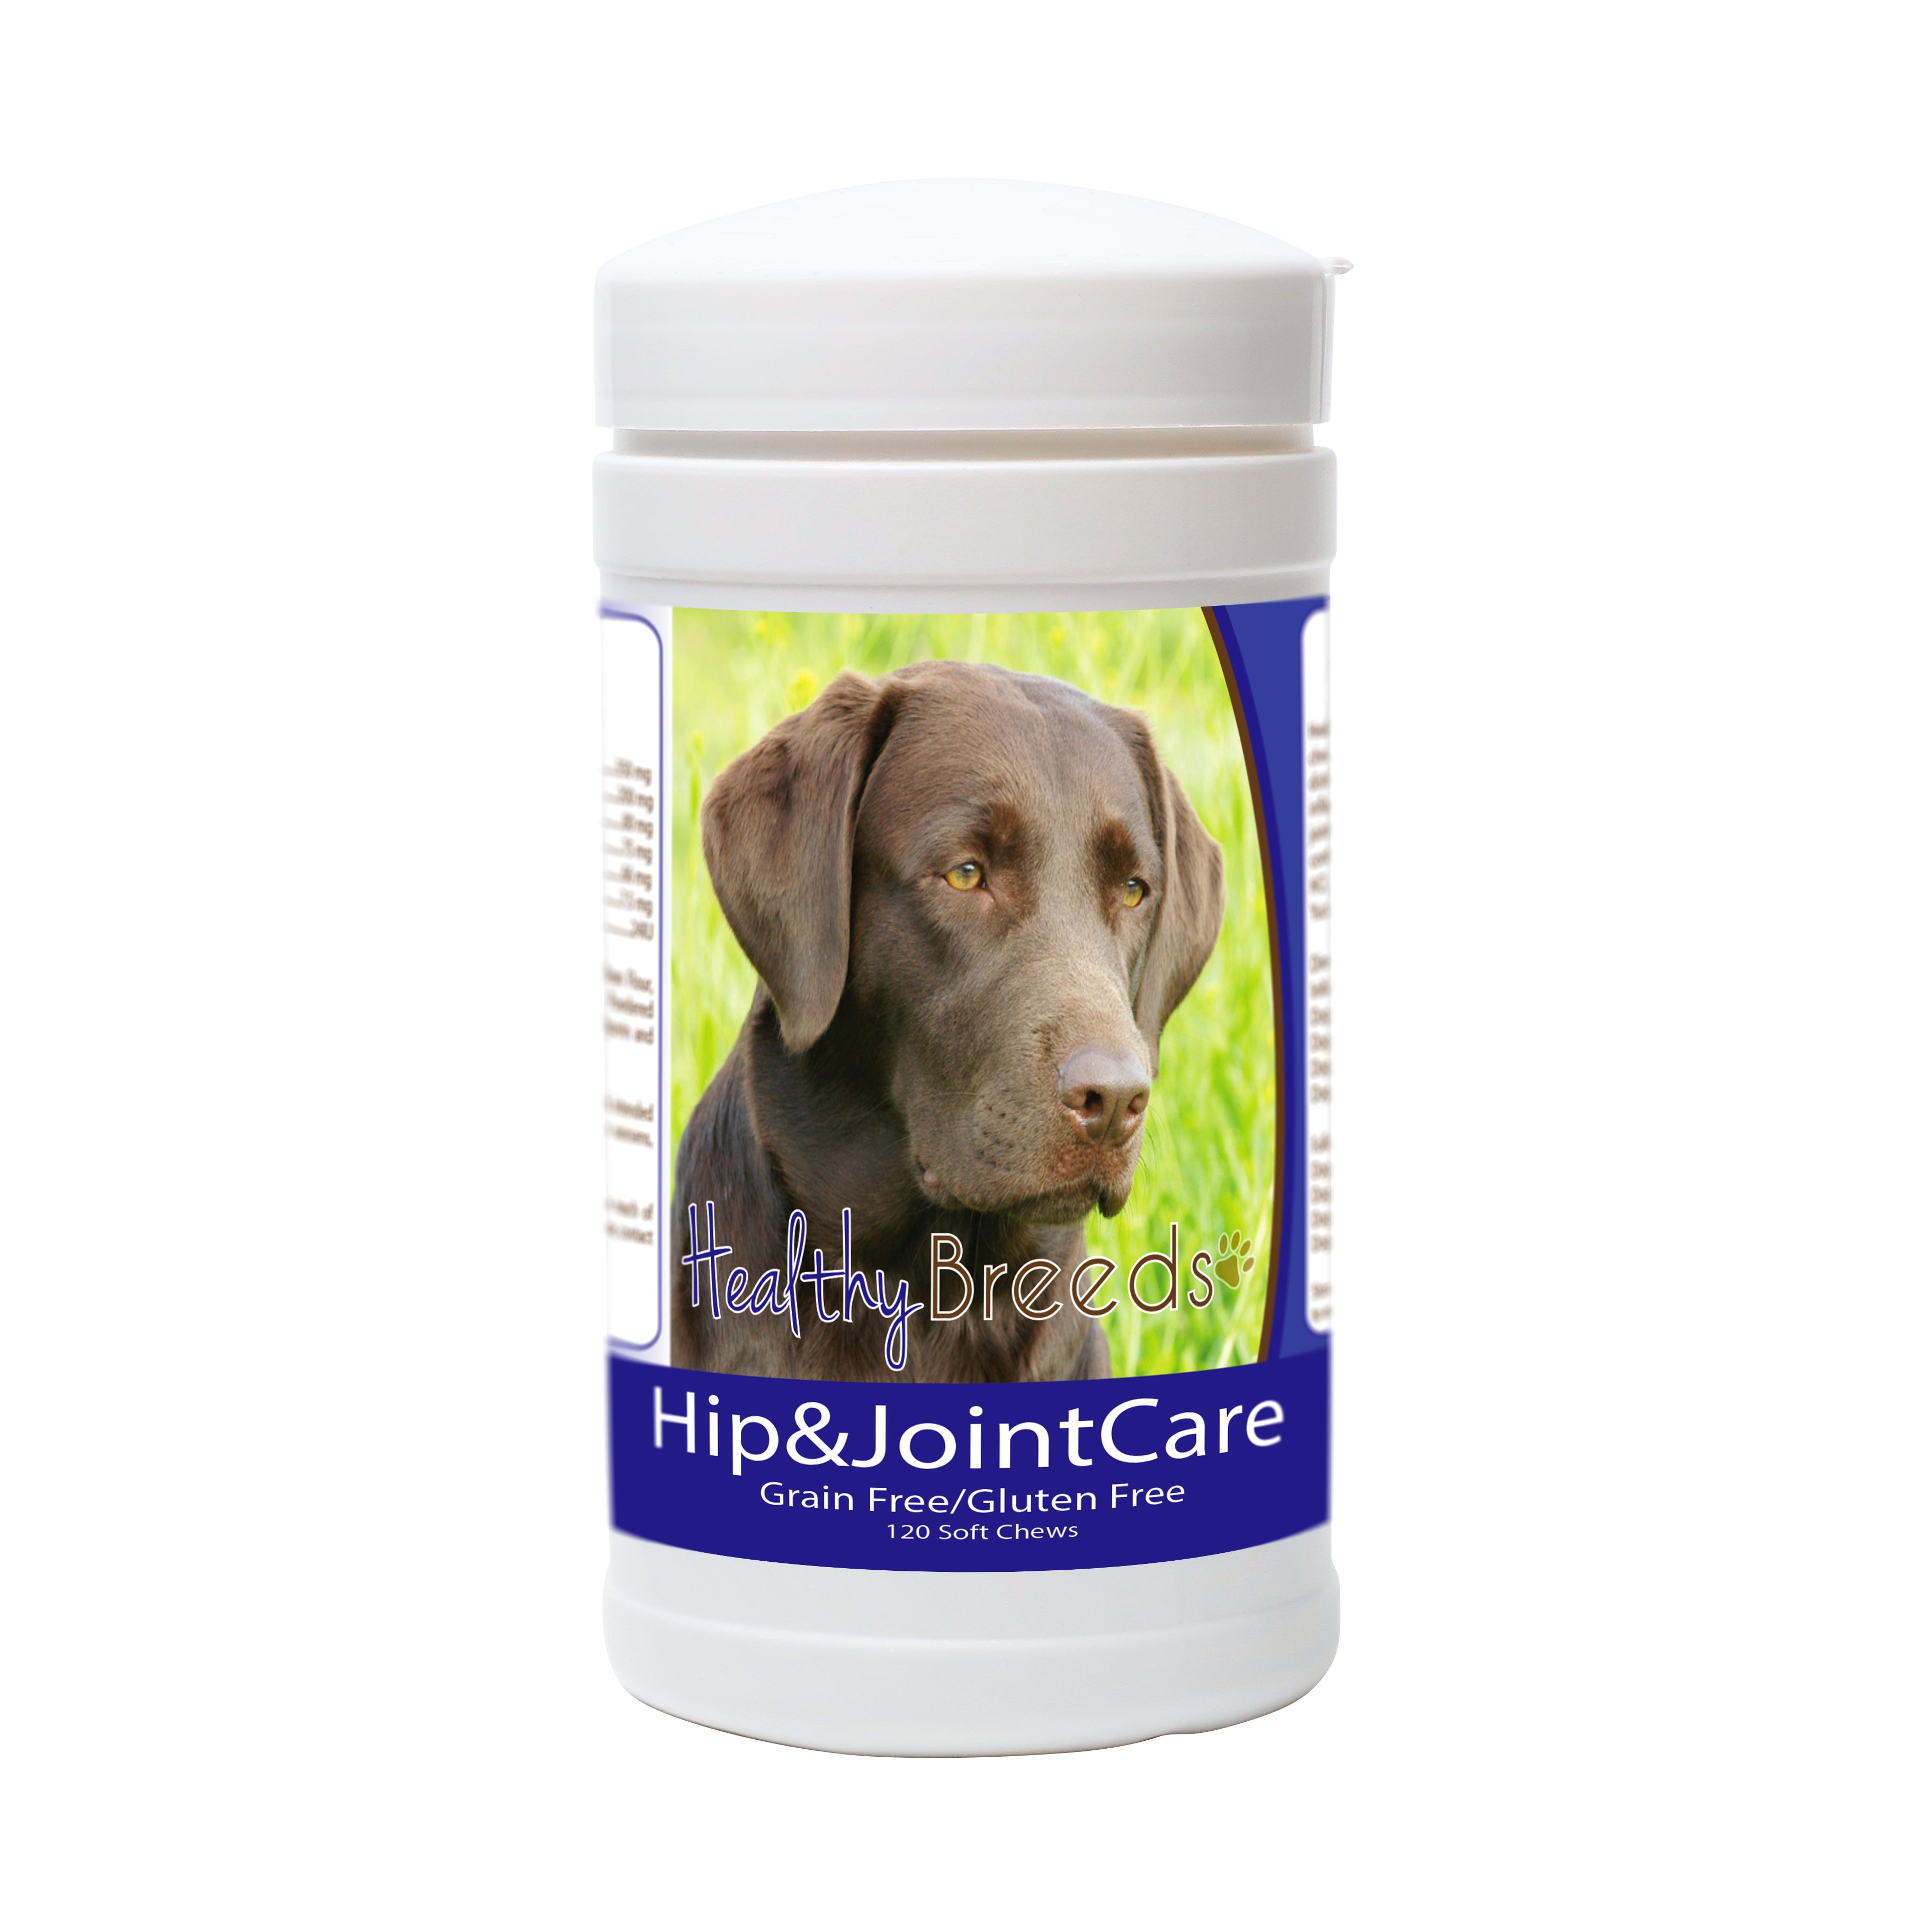 Healthy Breeds Hip & Joint Care Soft Chews - Jack Russell Terrier